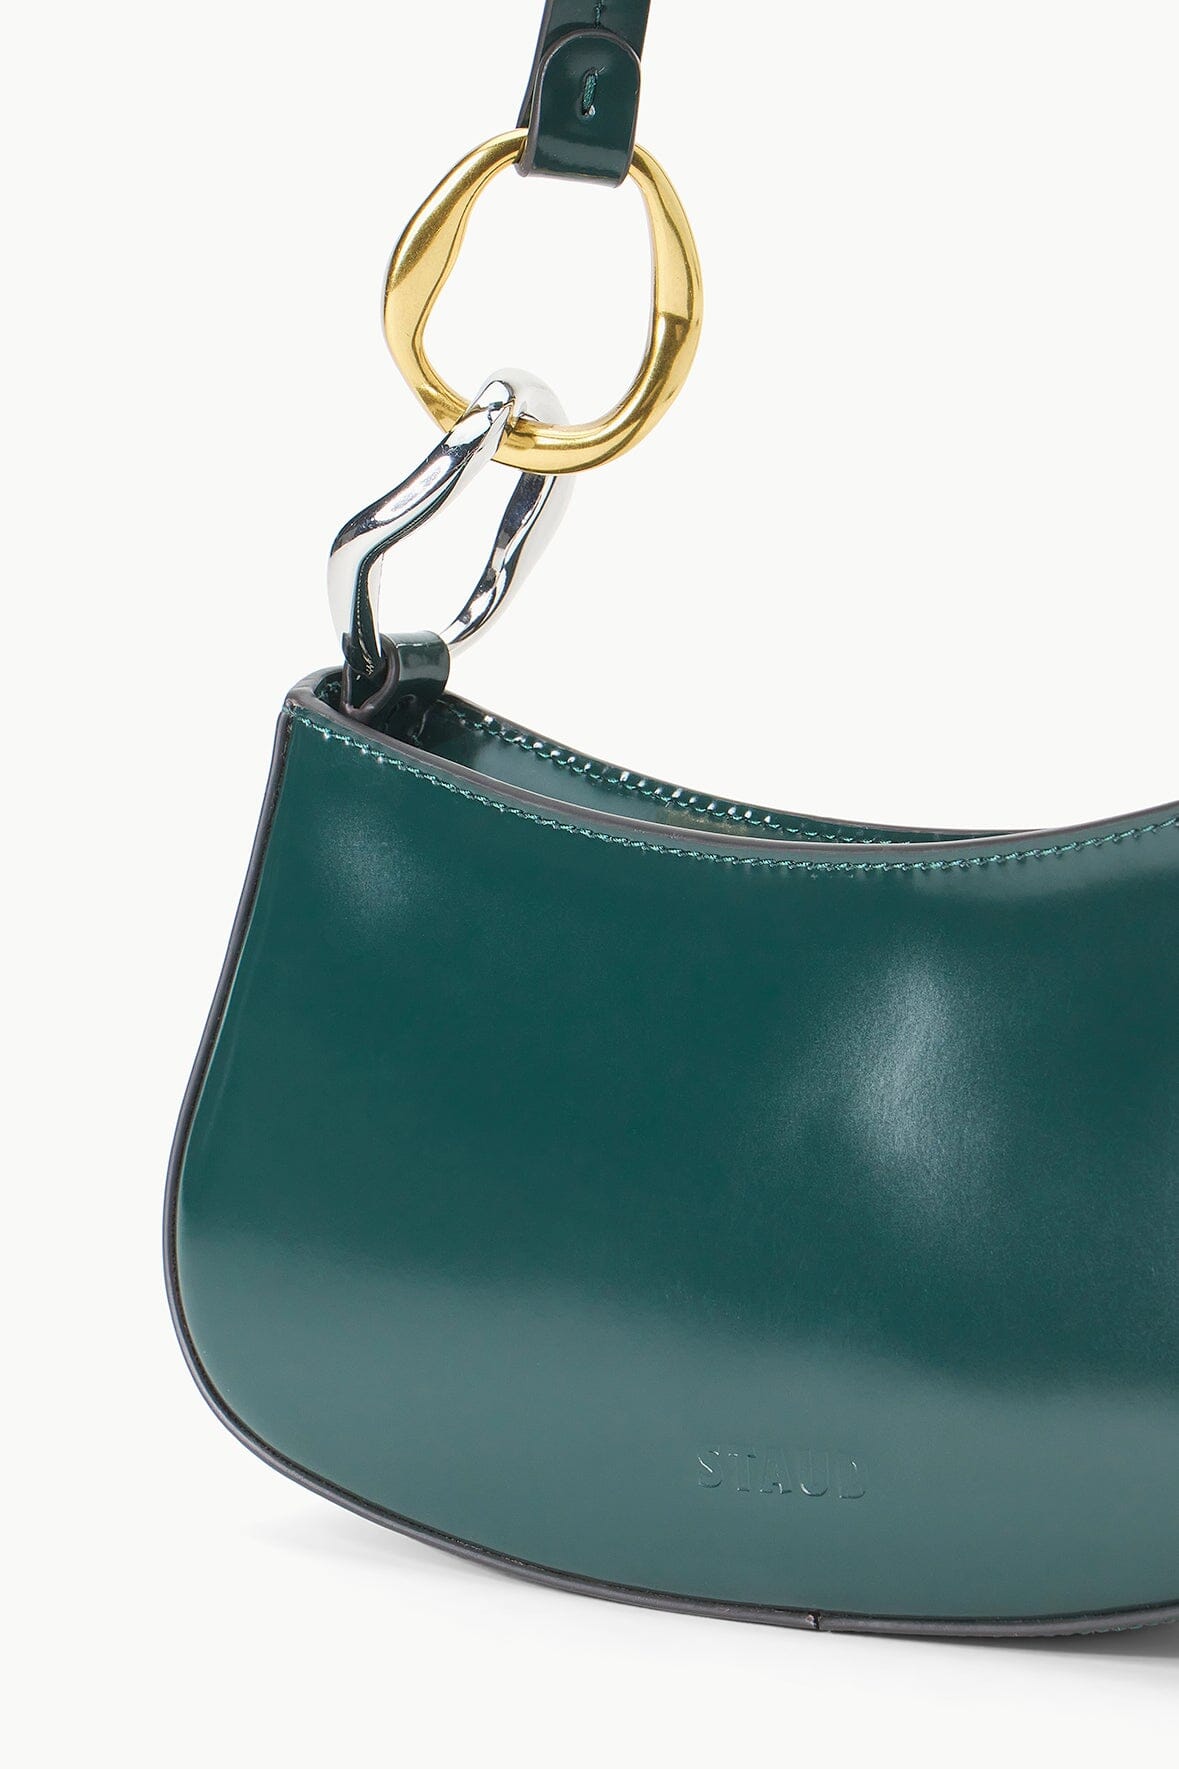 Staud Bean Convertible Patent Leather Shoulder Bag In Citron